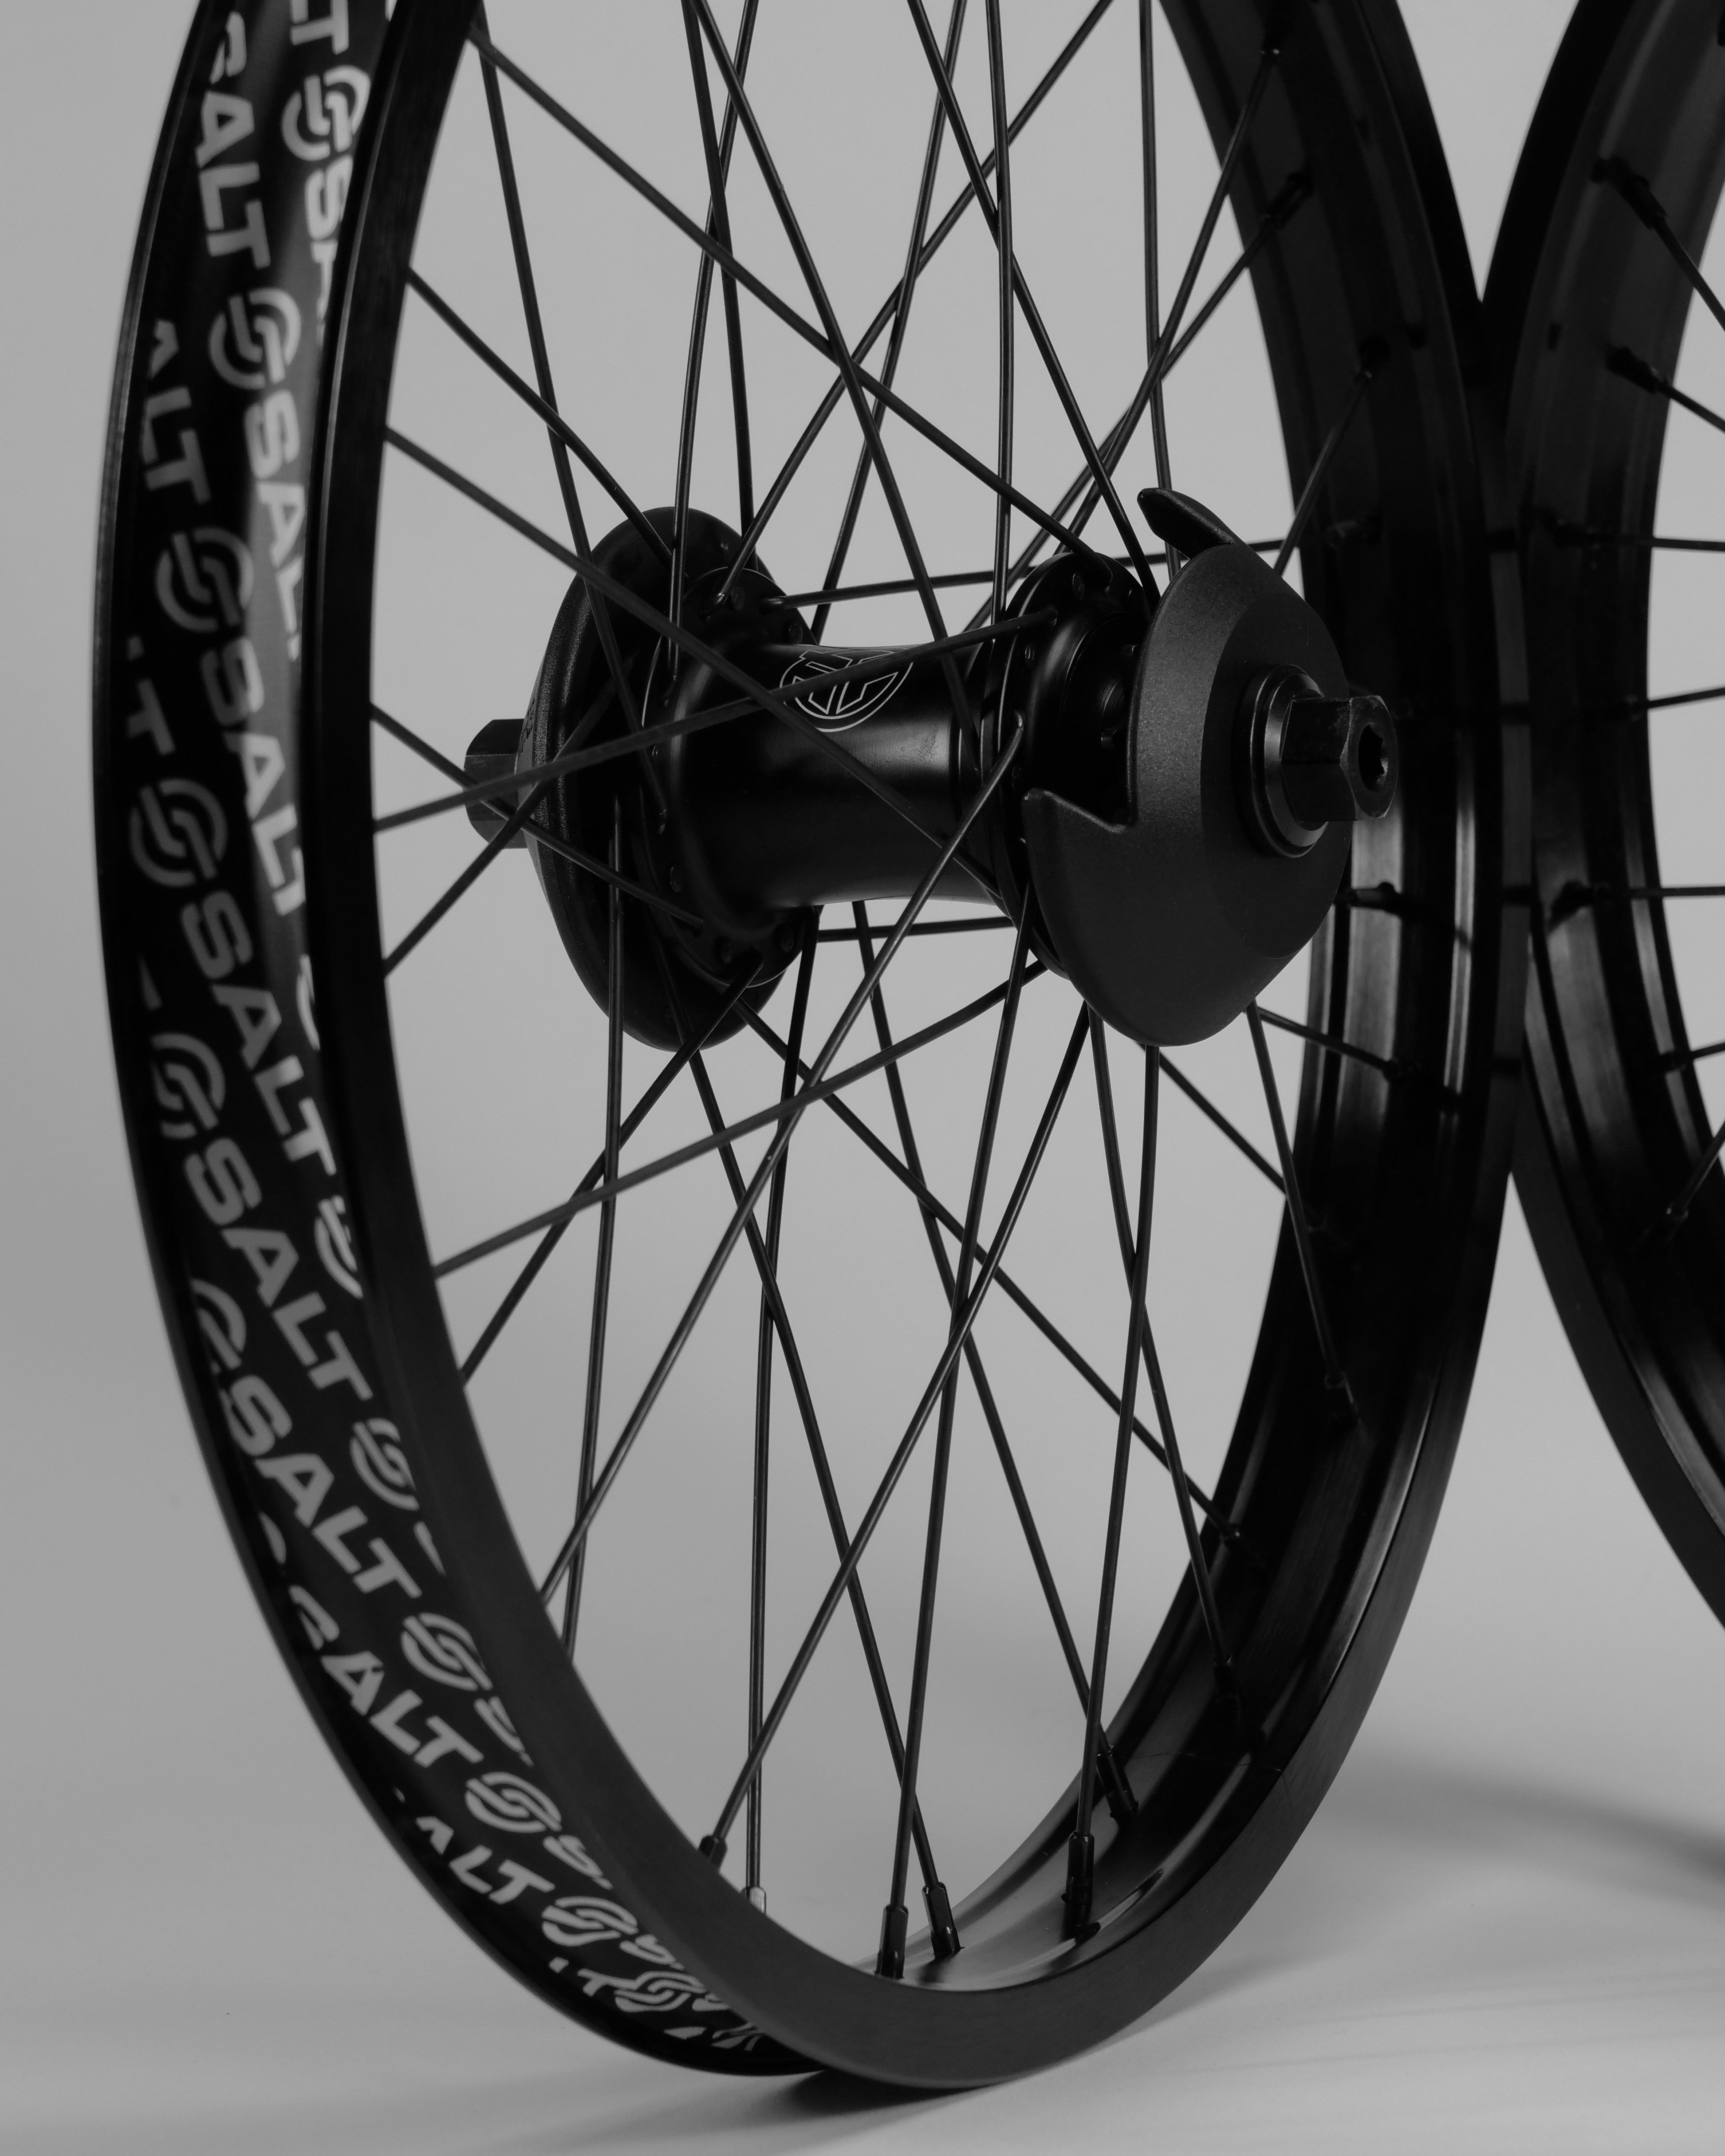 Two Federal Motion x Alienation 18 Custom Wheelset with intricate spokes and Alienation Black Sheep rims leaning against a plain background, displayed in monochrome.